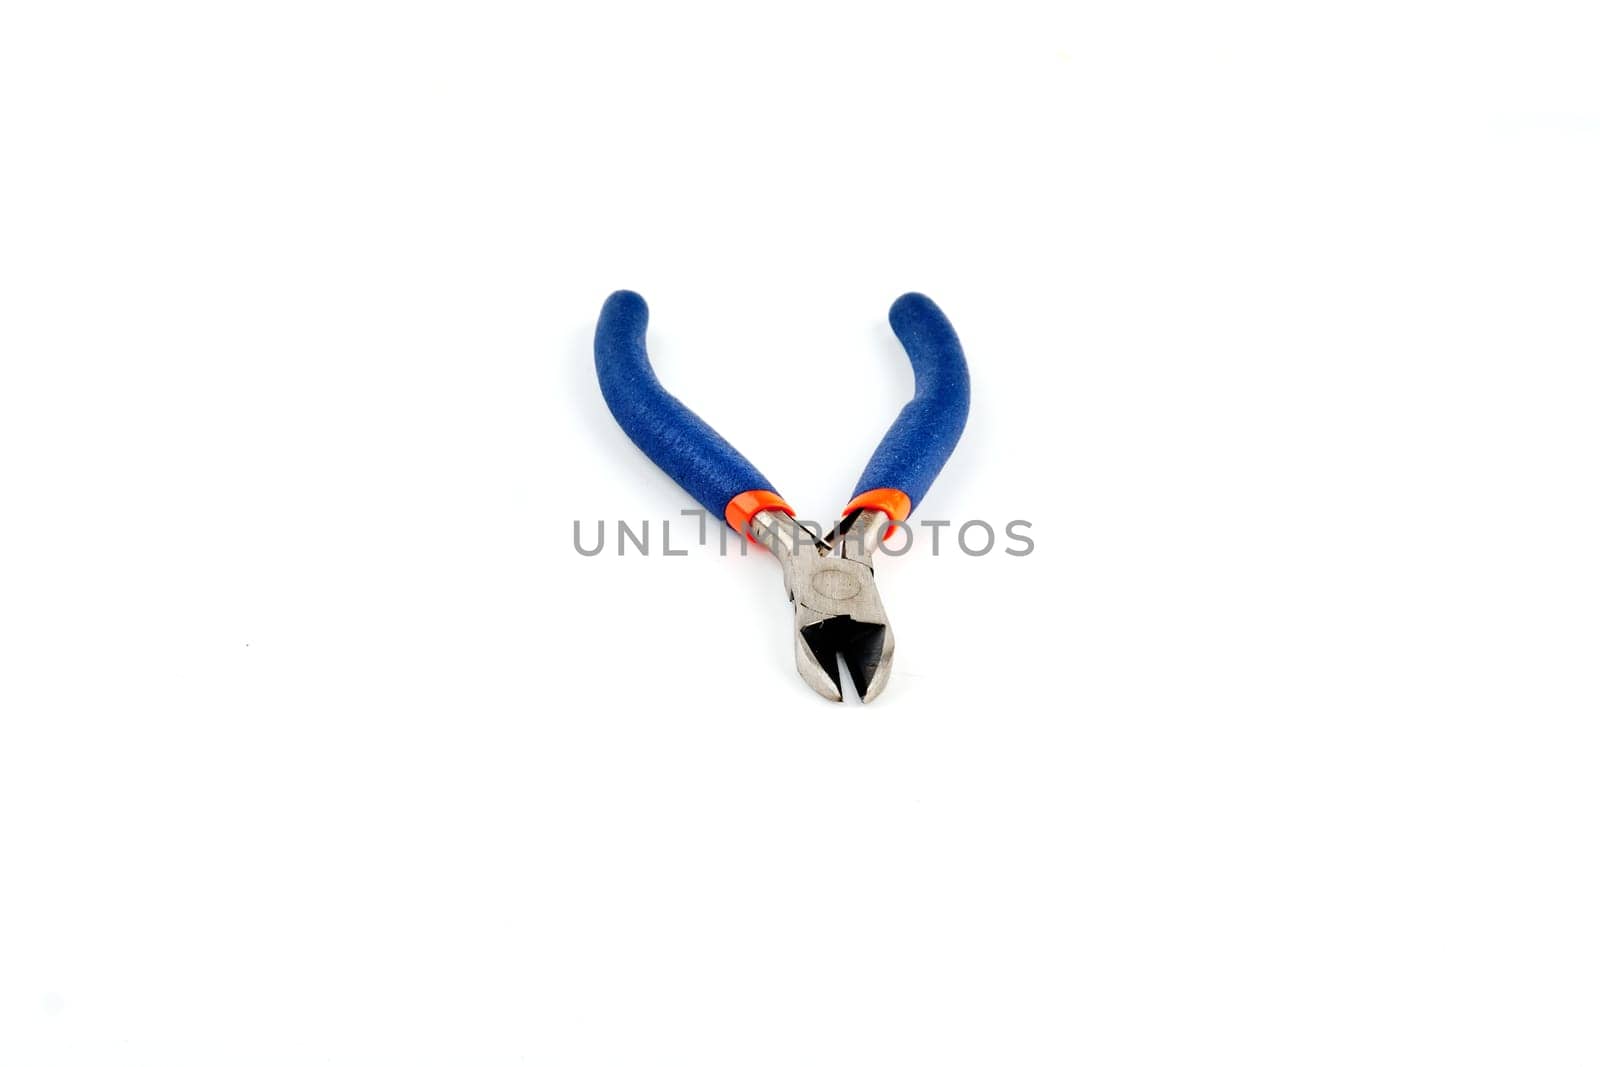 Metal wire cutting pliers are handmade equipment on a white isolate background. View from above